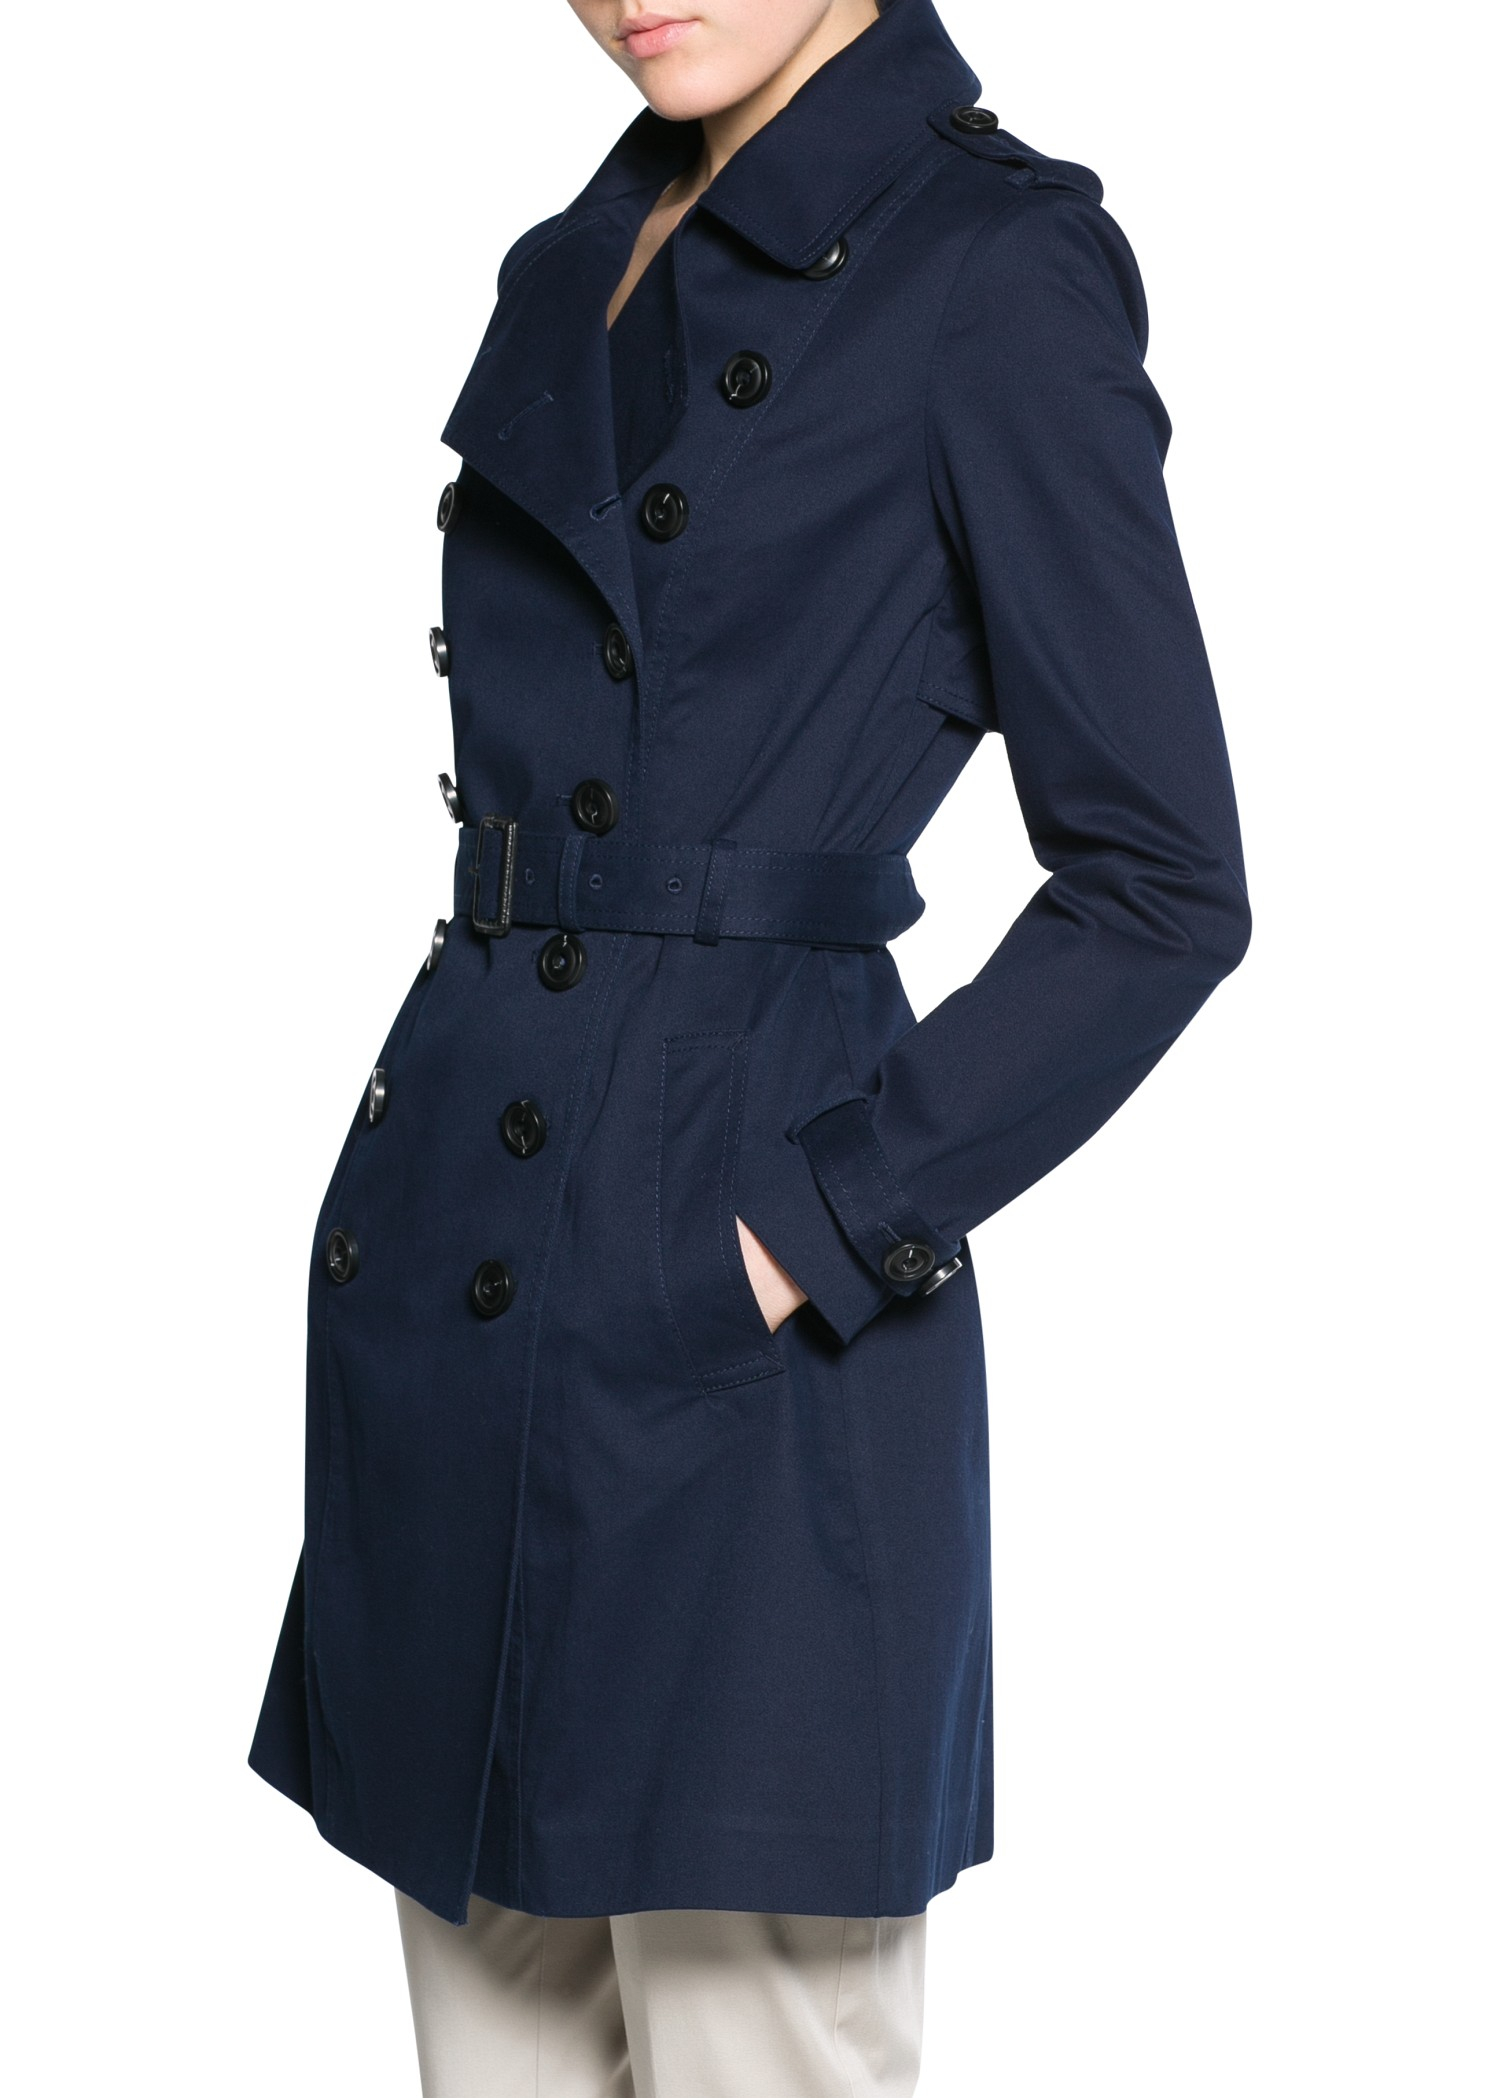 Mango Classic Cotton Trench Coat in Navy (Blue) - Lyst